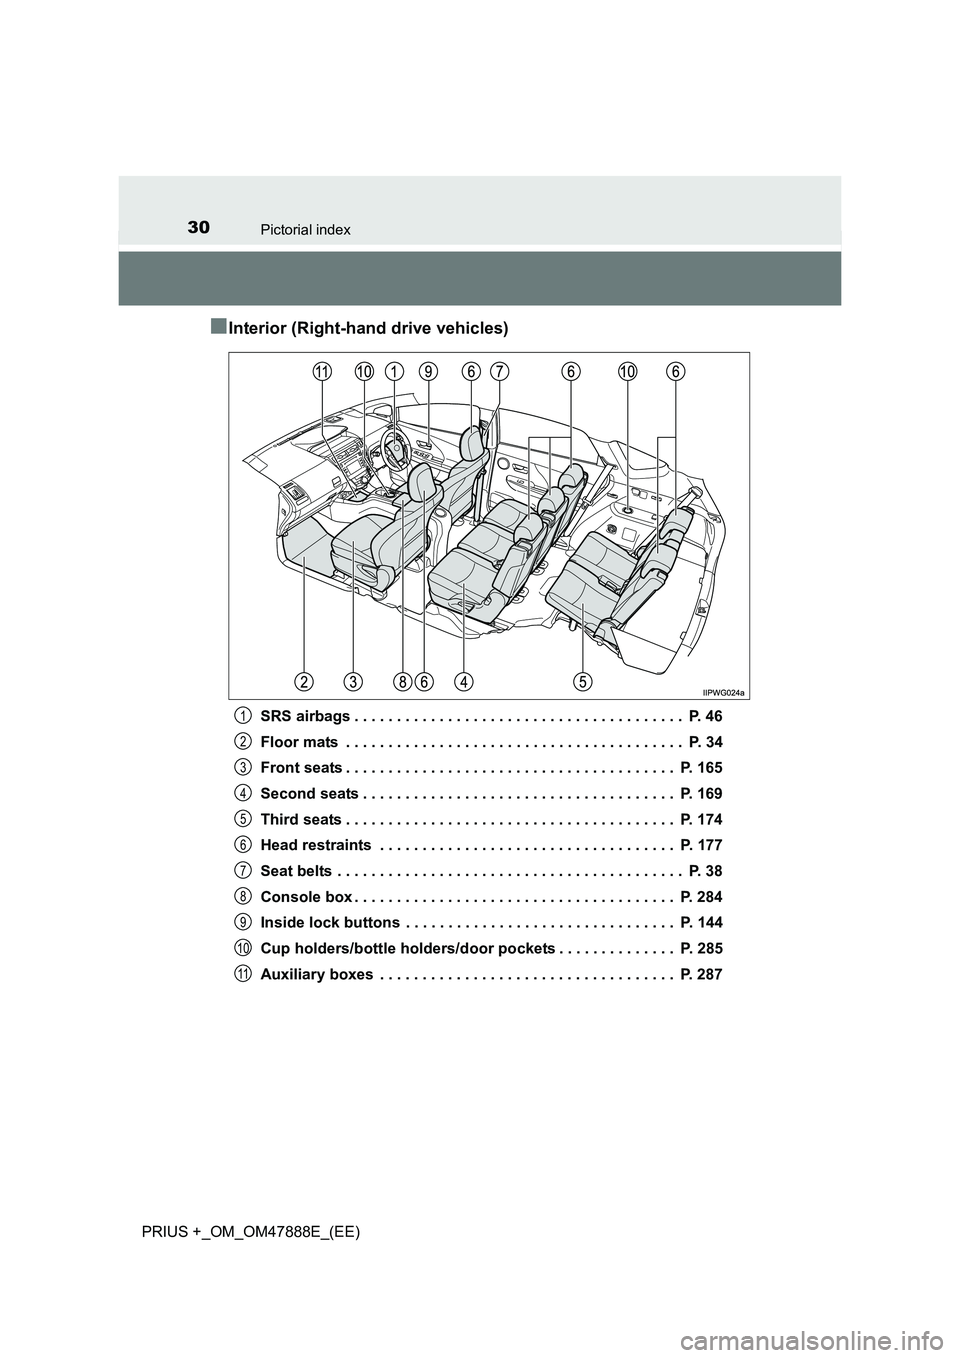 TOYOTA PRIUS PLUS 2014  Owners Manual 30Pictorial index
PRIUS +_OM_OM47888E_(EE)
■Interior (Right-hand drive vehicles)
SRS airbags . . . . . . . . . . . . . . . . . . . . . . . . . . . . . . . . . . . . . . .  P. 46
Floor mats  . . . . 